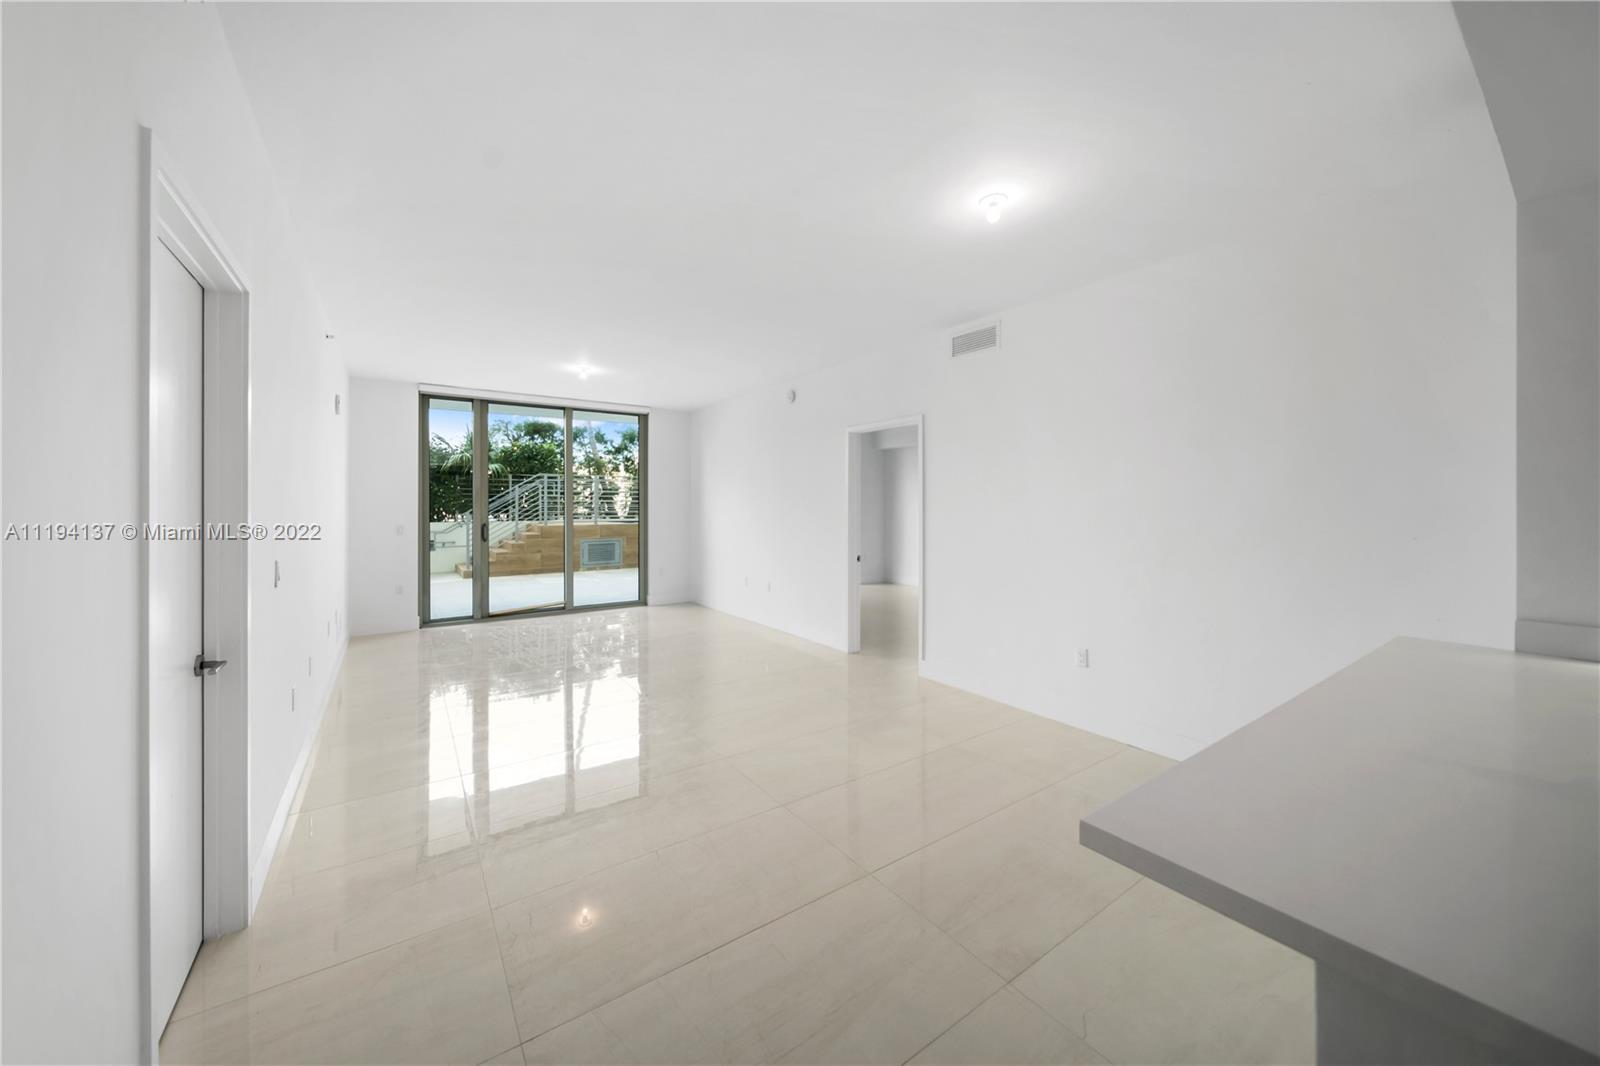 Outstanding Lanai located on the 5th floor with 2 bedrooms, 3 bathrooms and a den. This Lanai has a private jacuzzi and private terrace. This unit is fully upgraded and ready to move-in.  Very easy to show and our sales executive will guide you through the process.